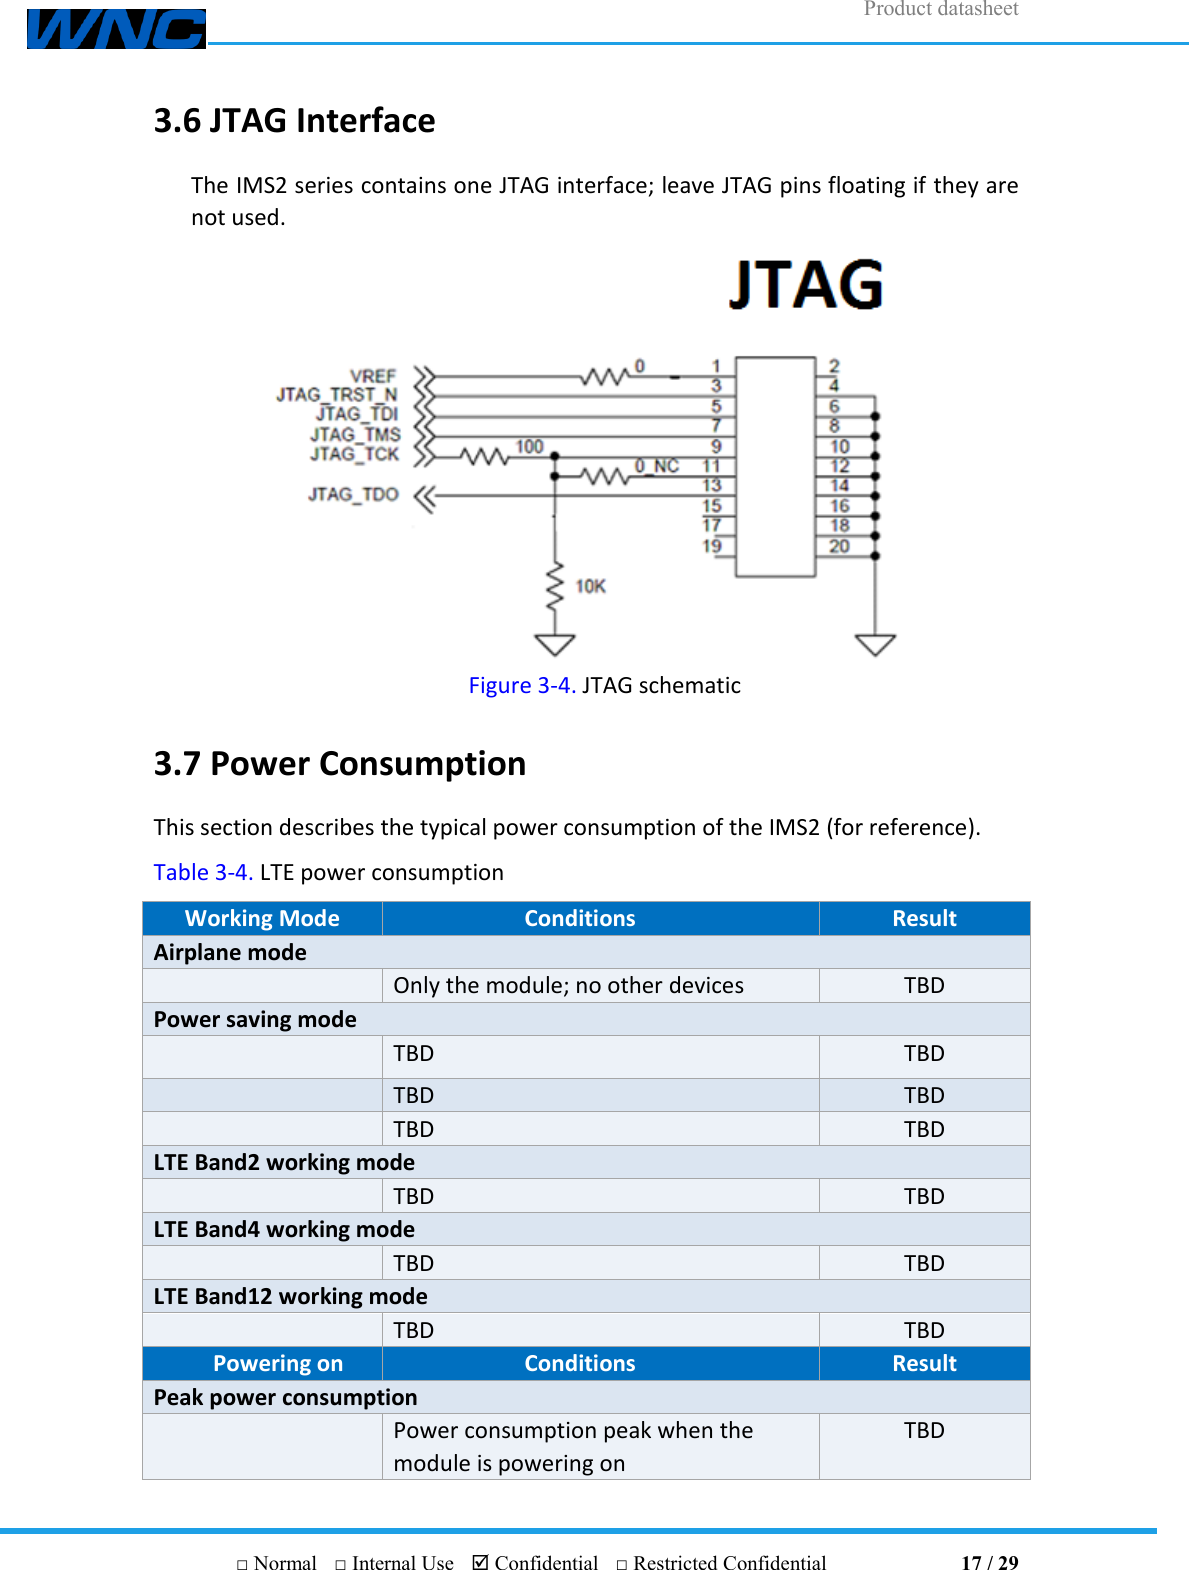 Product datasheet       □ Normal  □ Internal Use   Confidential  □ Restricted Confidential                                17 / 29 3.6 JTAG Interface The IMS2 series contains one JTAG interface; leave JTAG pins floating if they are not used.  Figure 3-4. JTAG schematic 3.7 Power Consumption This section describes the typical power consumption of the IMS2 (for reference). Table 3-4. LTE power consumption Working Mode Conditions Result Airplane mode  Only the module; no other devices TBD Power saving mode  TBD TBD  TBD TBD  TBD TBD LTE Band2 working mode  TBD TBD LTE Band4 working mode  TBD TBD LTE Band12 working mode  TBD TBD Powering on Conditions Result Peak power consumption  Power consumption peak when the module is powering on TBD 